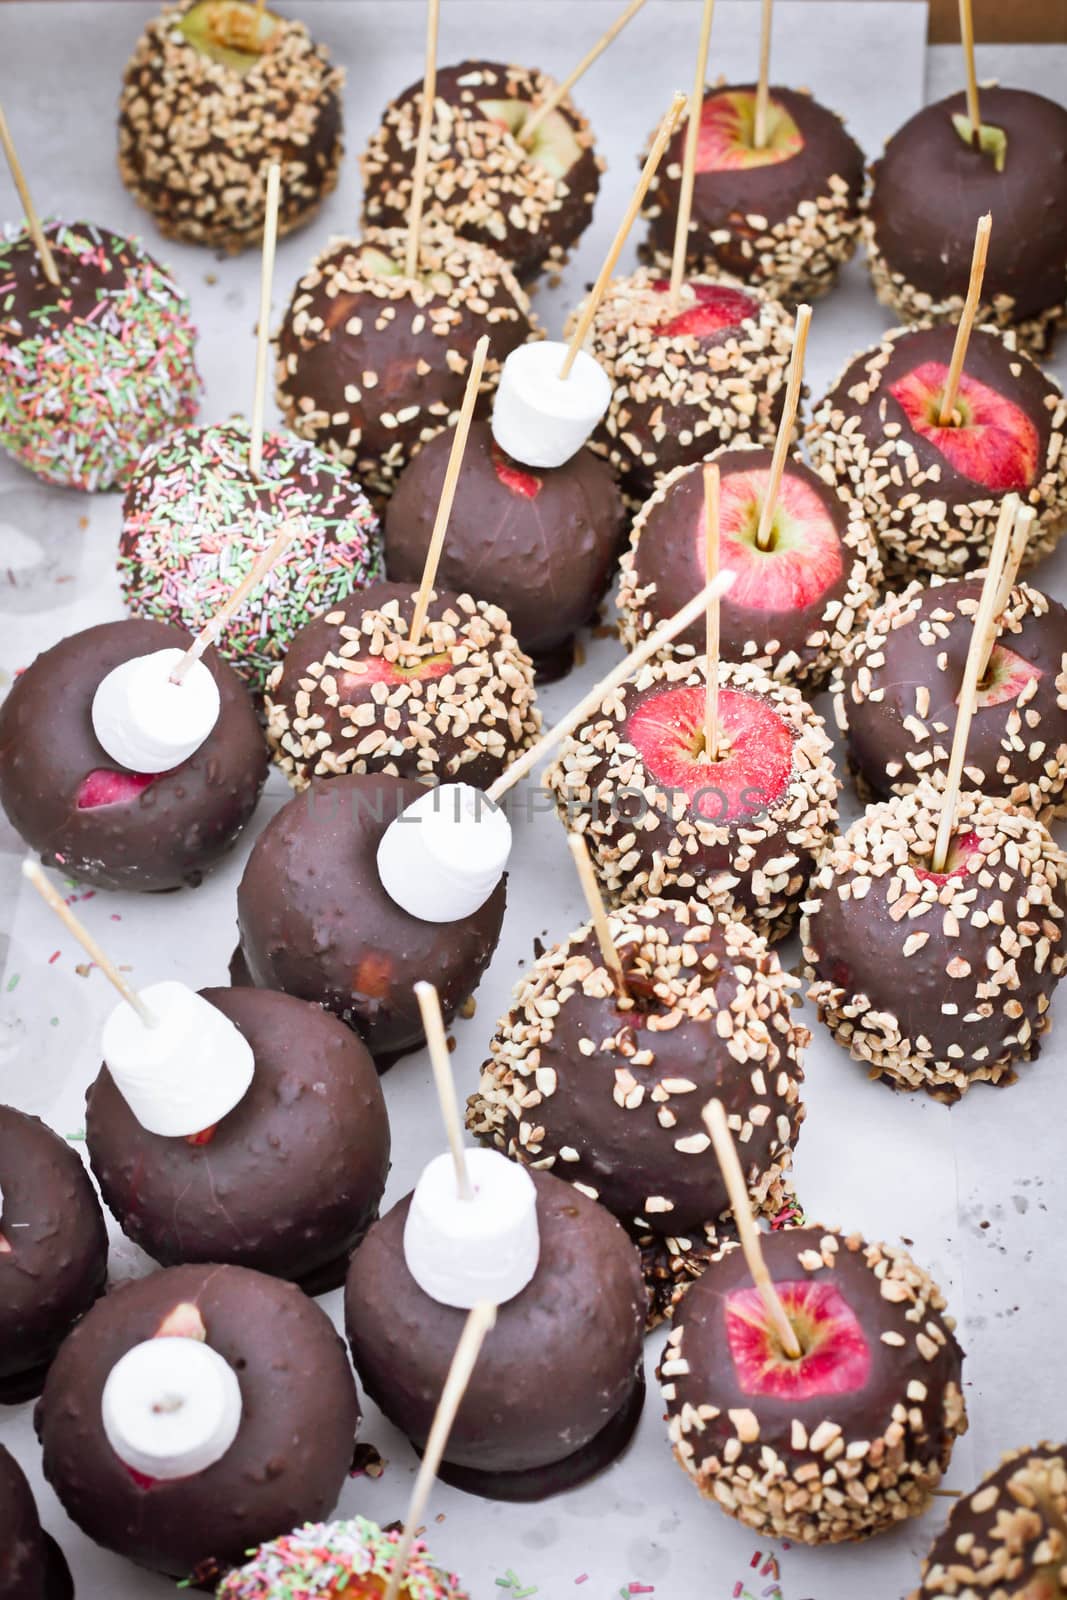 Apples covered in chocolate and decorations